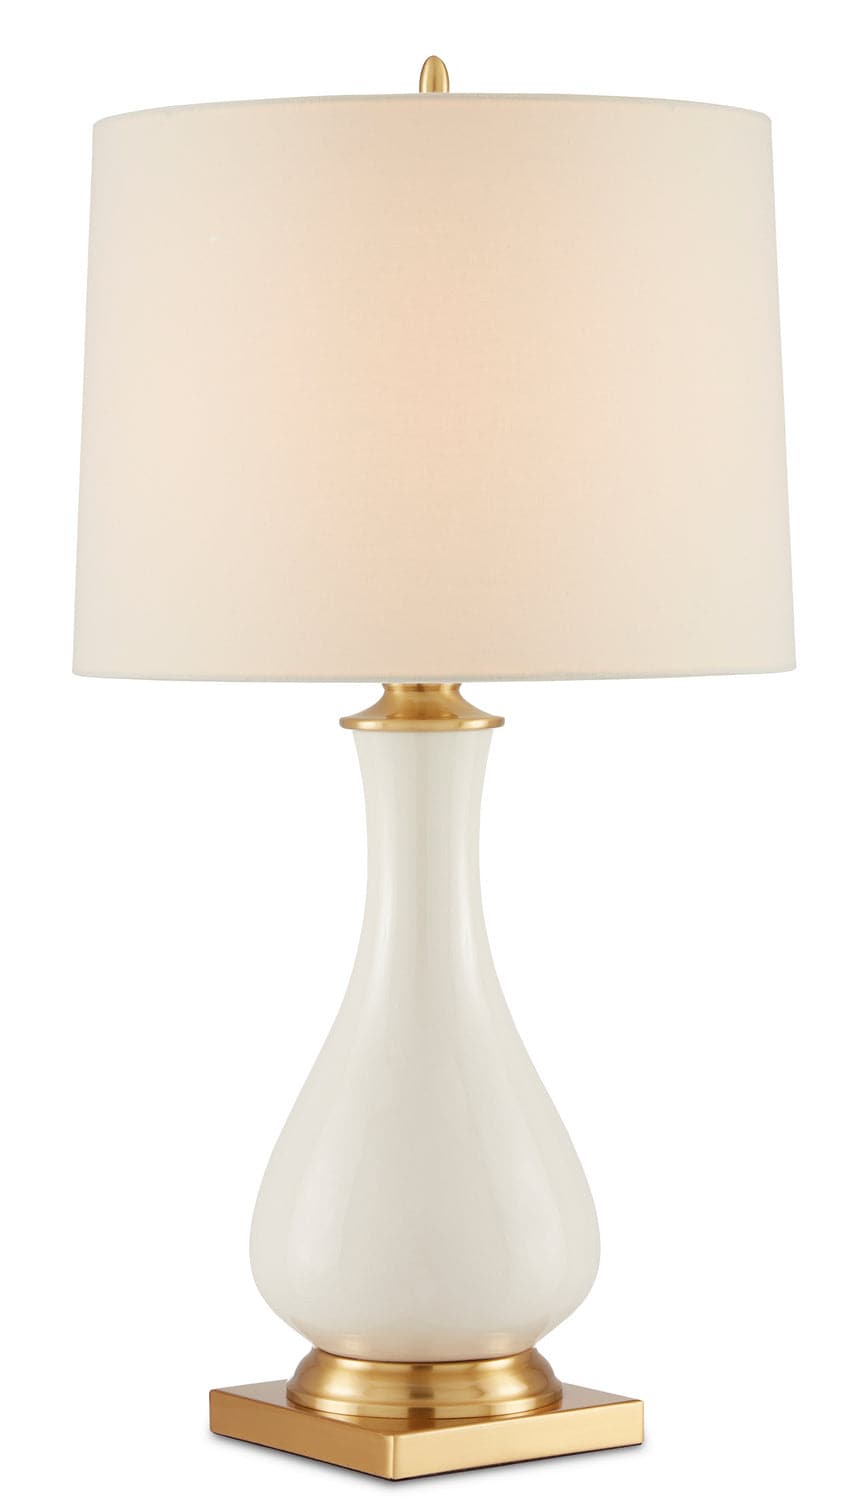 One Light Table Lamp from the Lynton collection in Cream Crackle/Brass finish